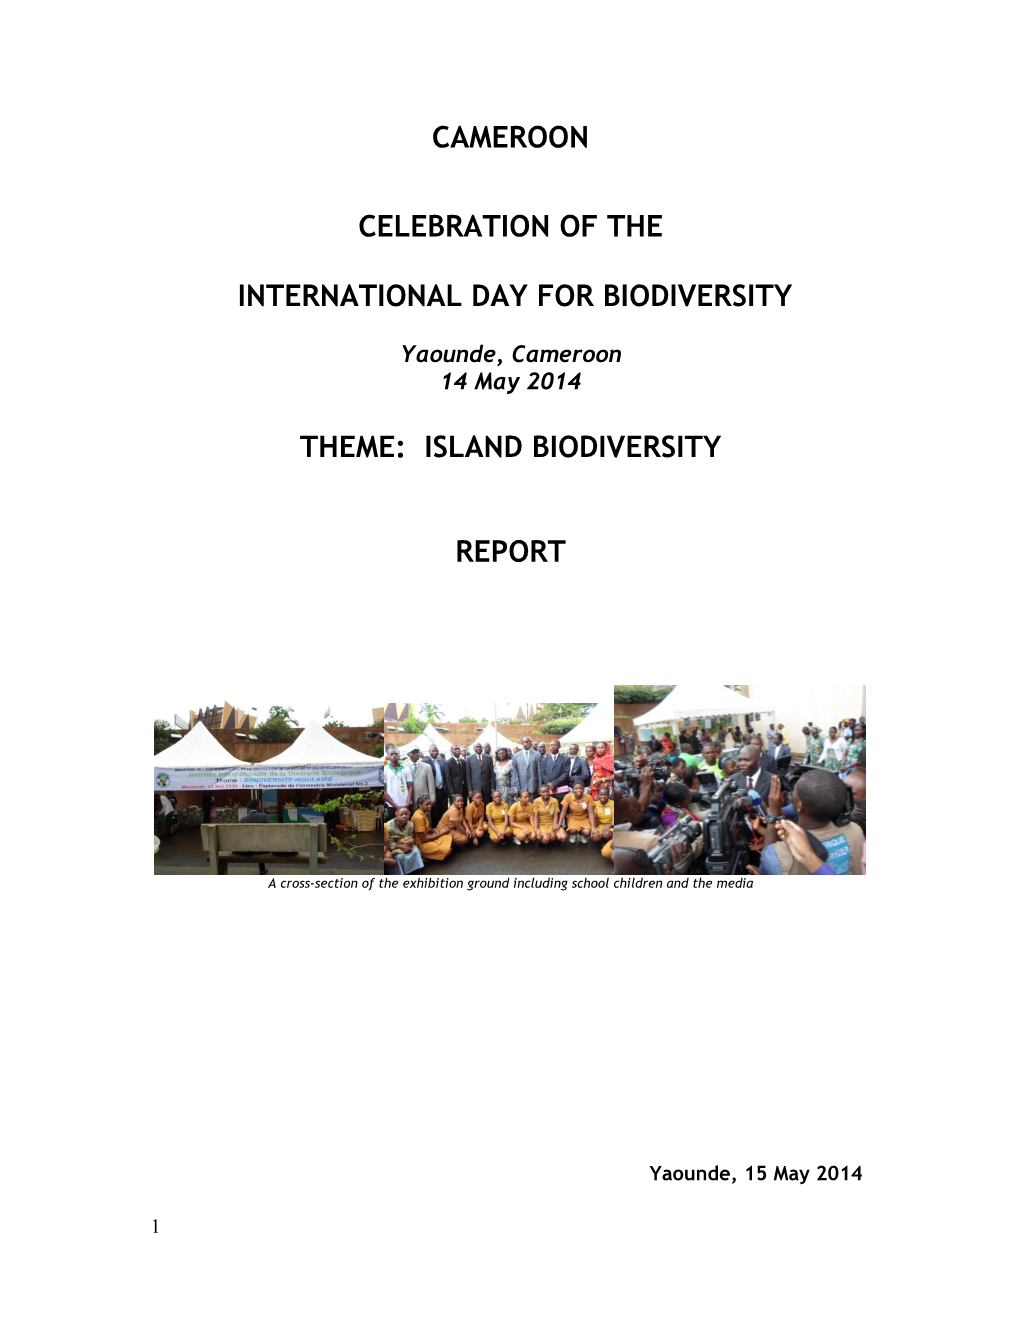 Report on the IDB2014 Celebrations in Cameroon